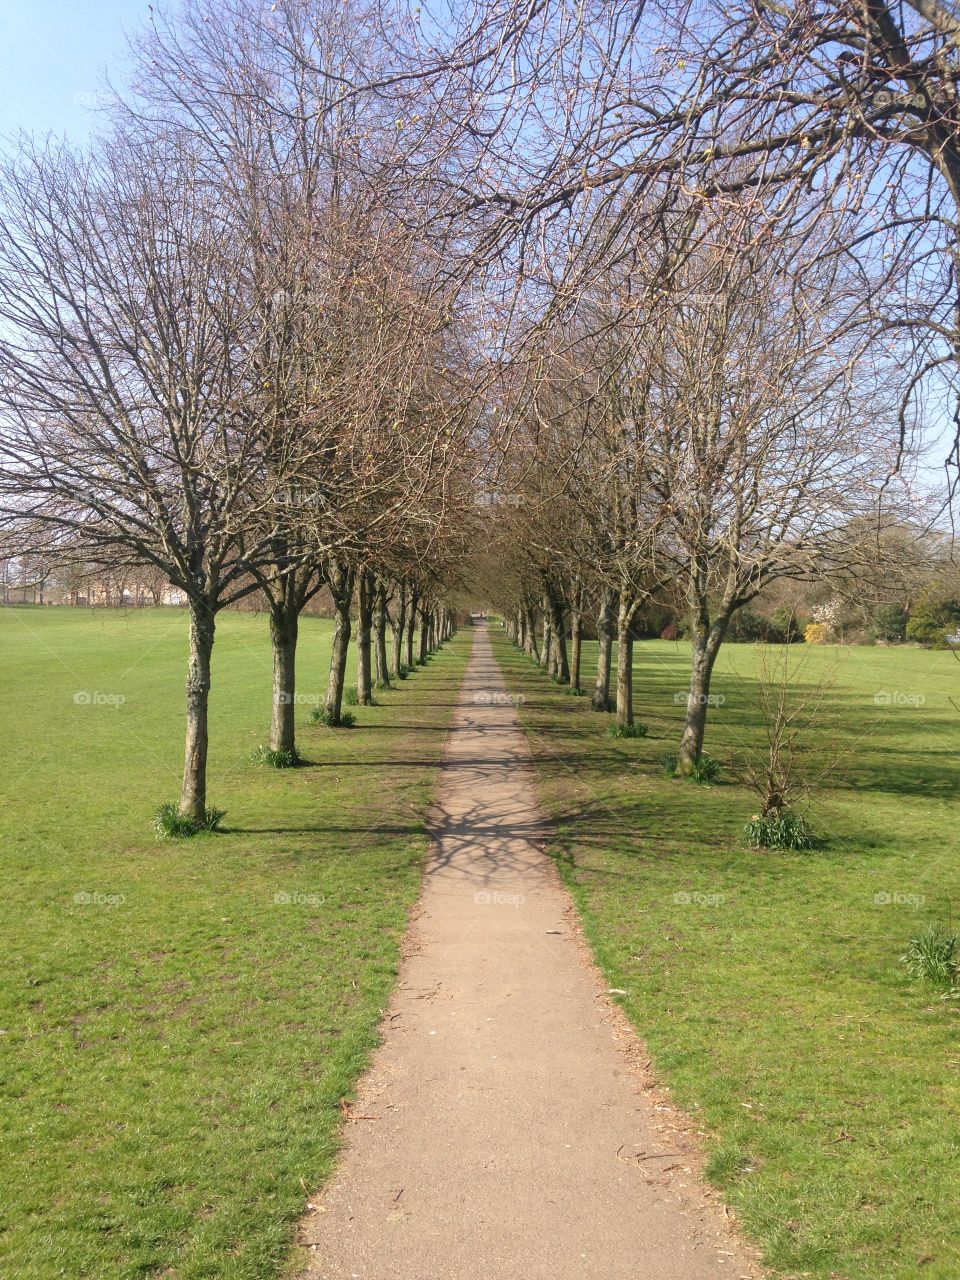 The path. Tree line path in my local park